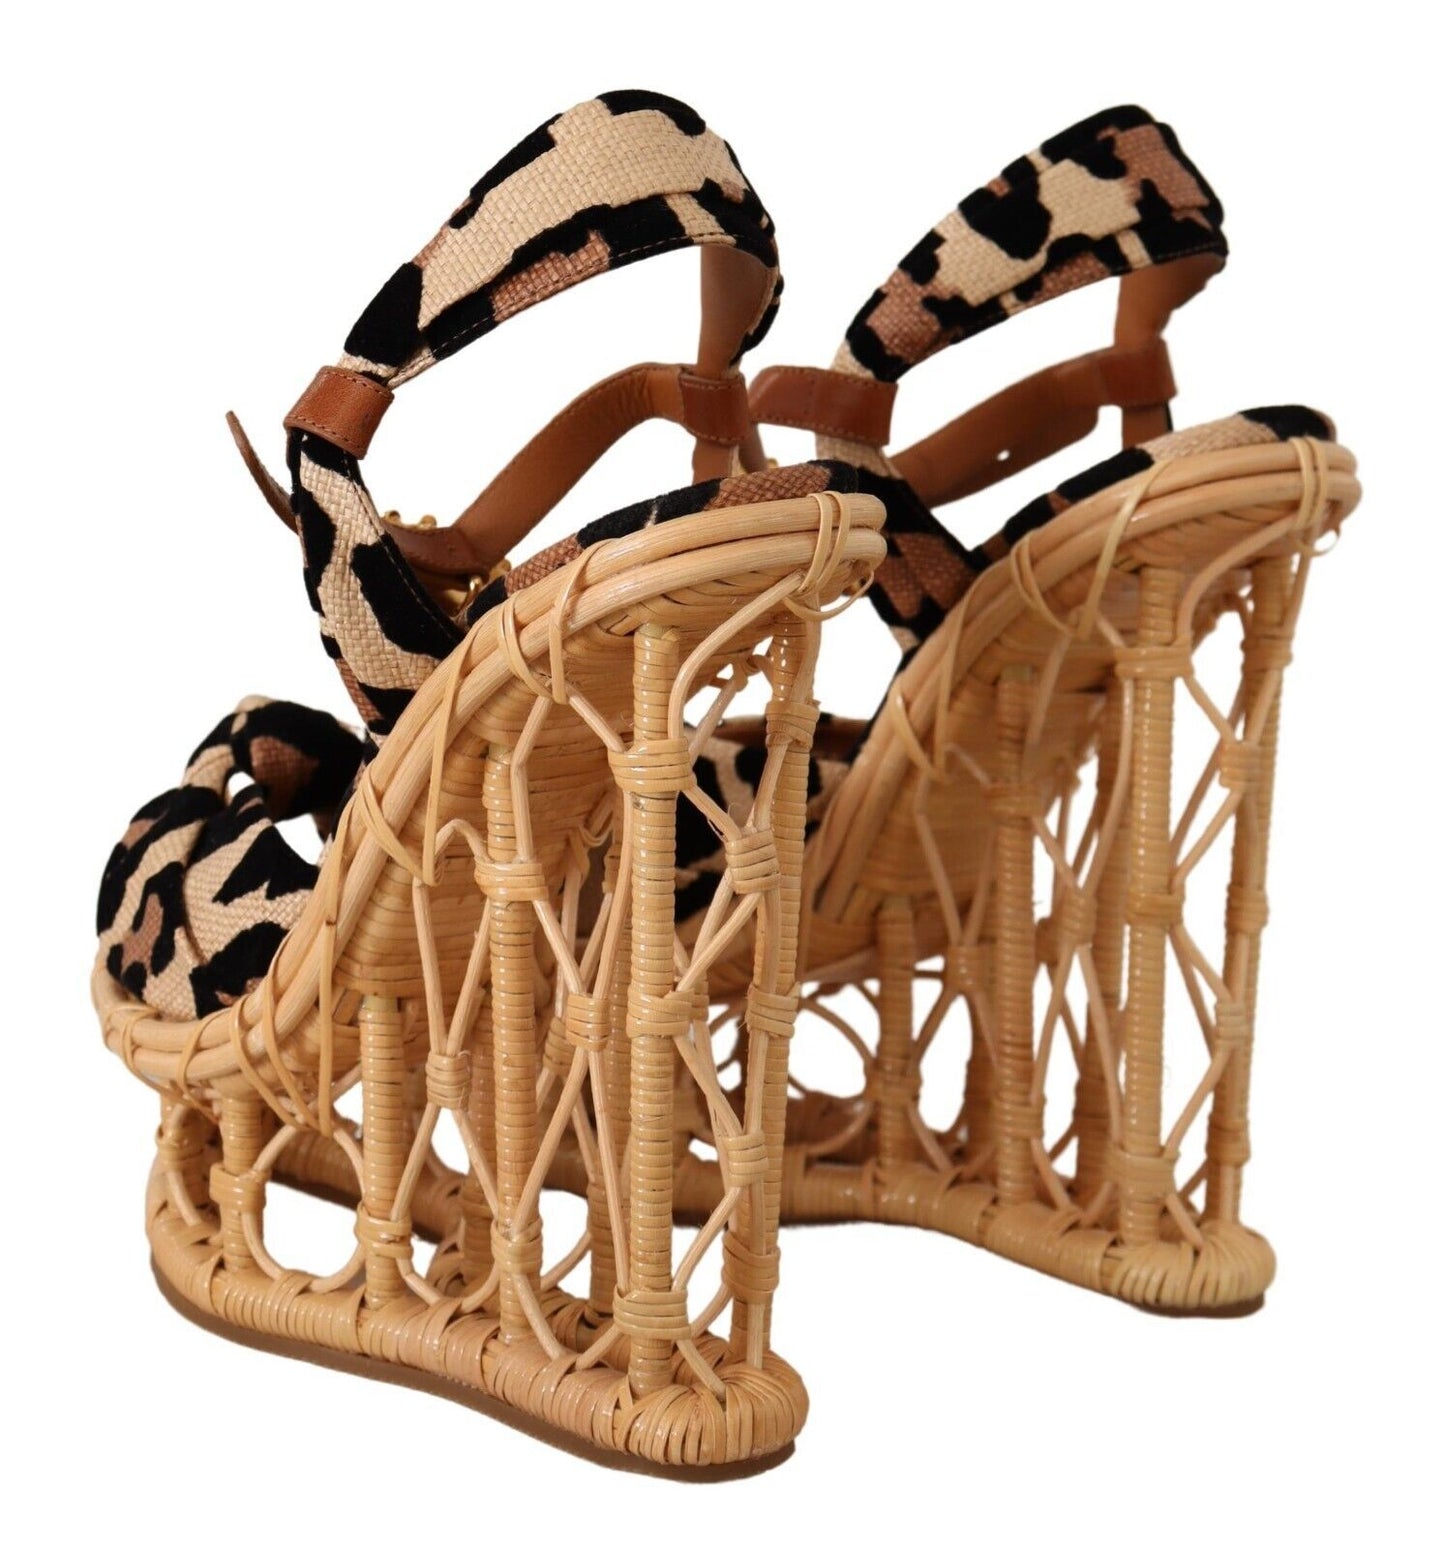 Elevate Your Style with Crystal-Embellished Wedge Sandals